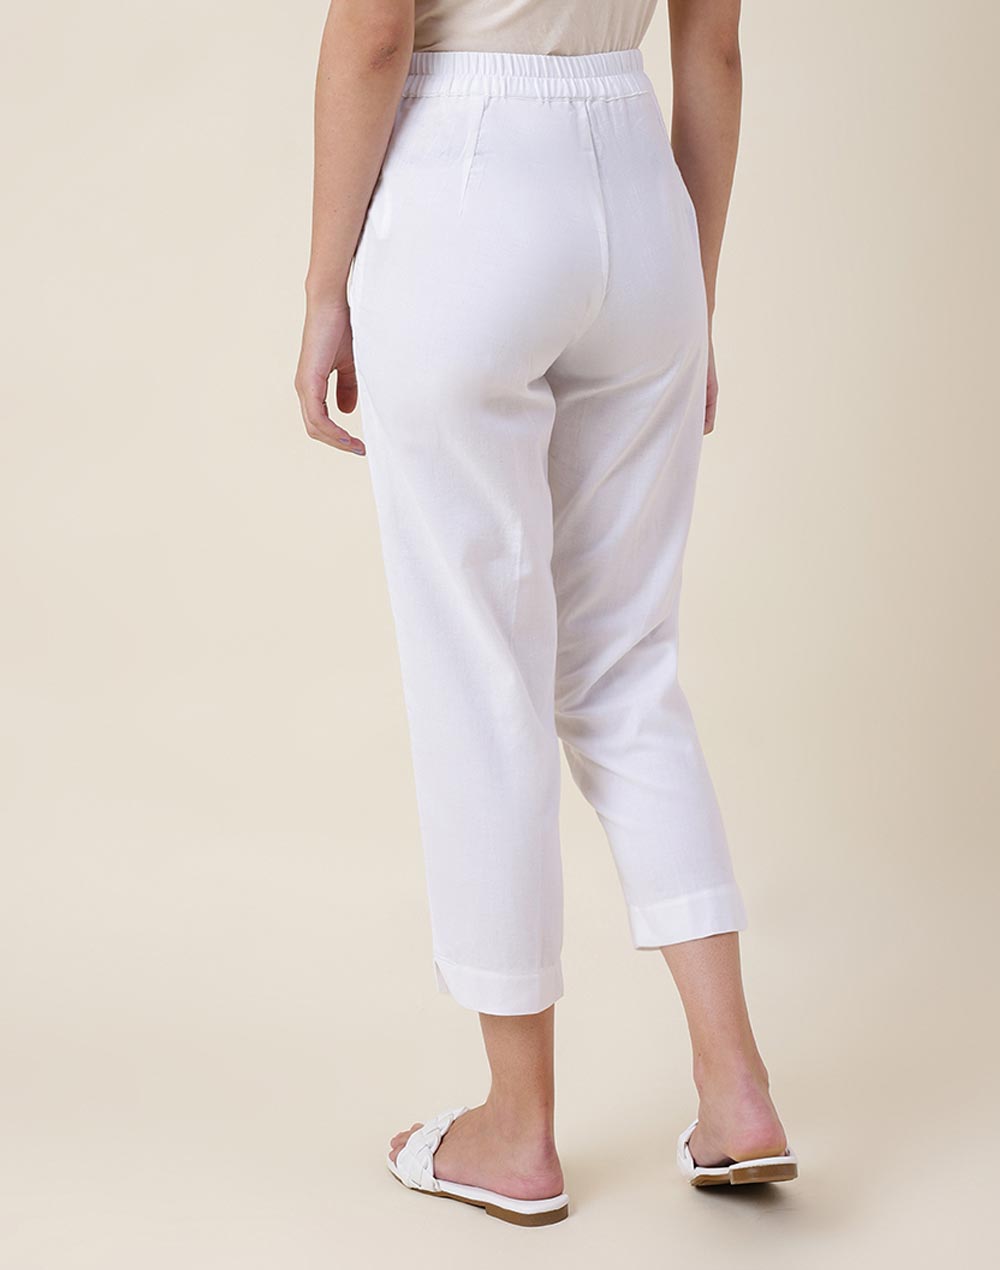 White Cotton Slim Fit Casual Pant